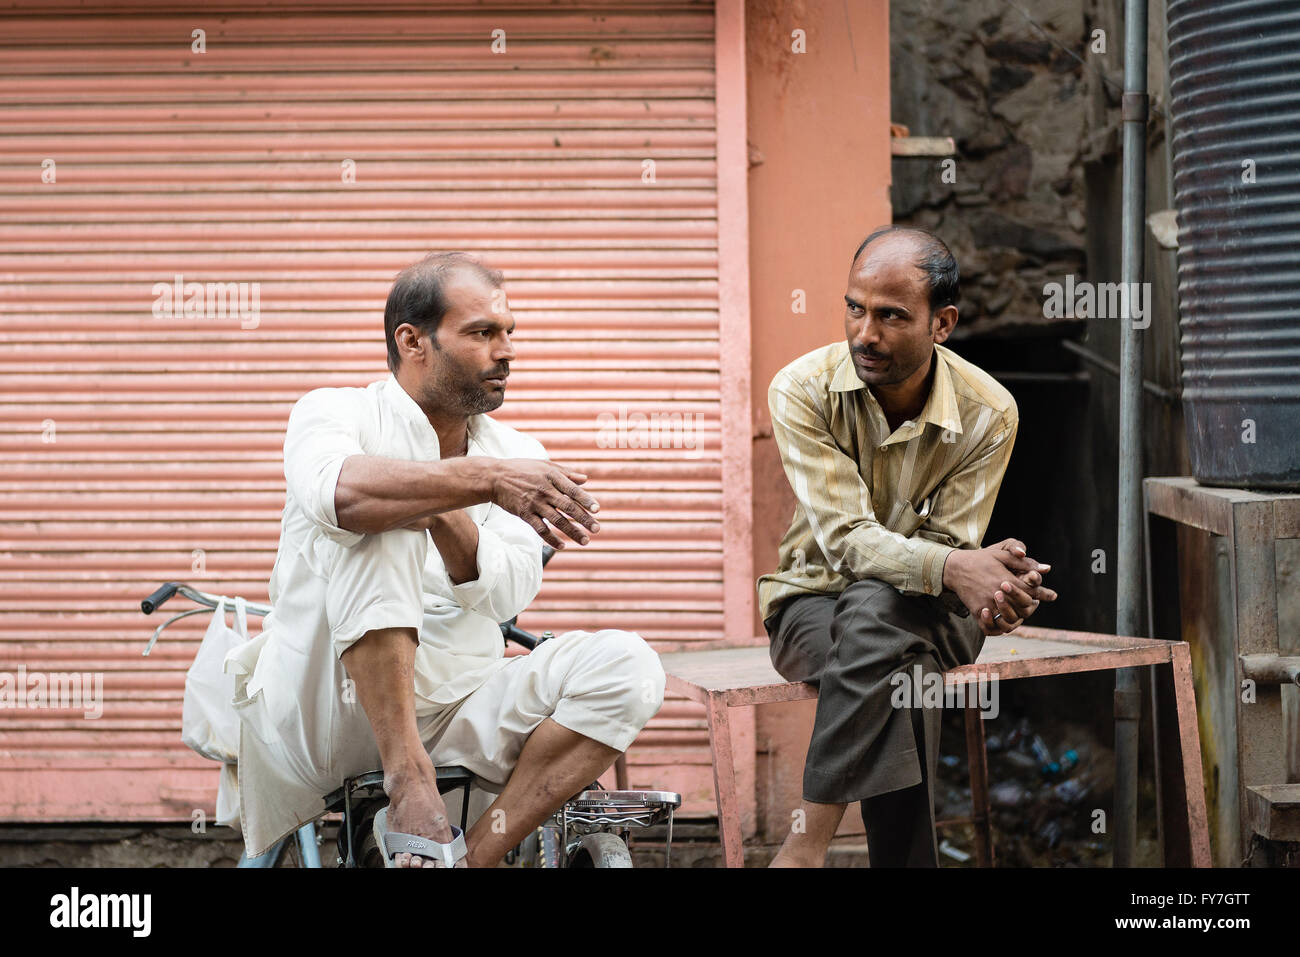 Two Indian men in conversation in old town of Jaipur Stock Photo